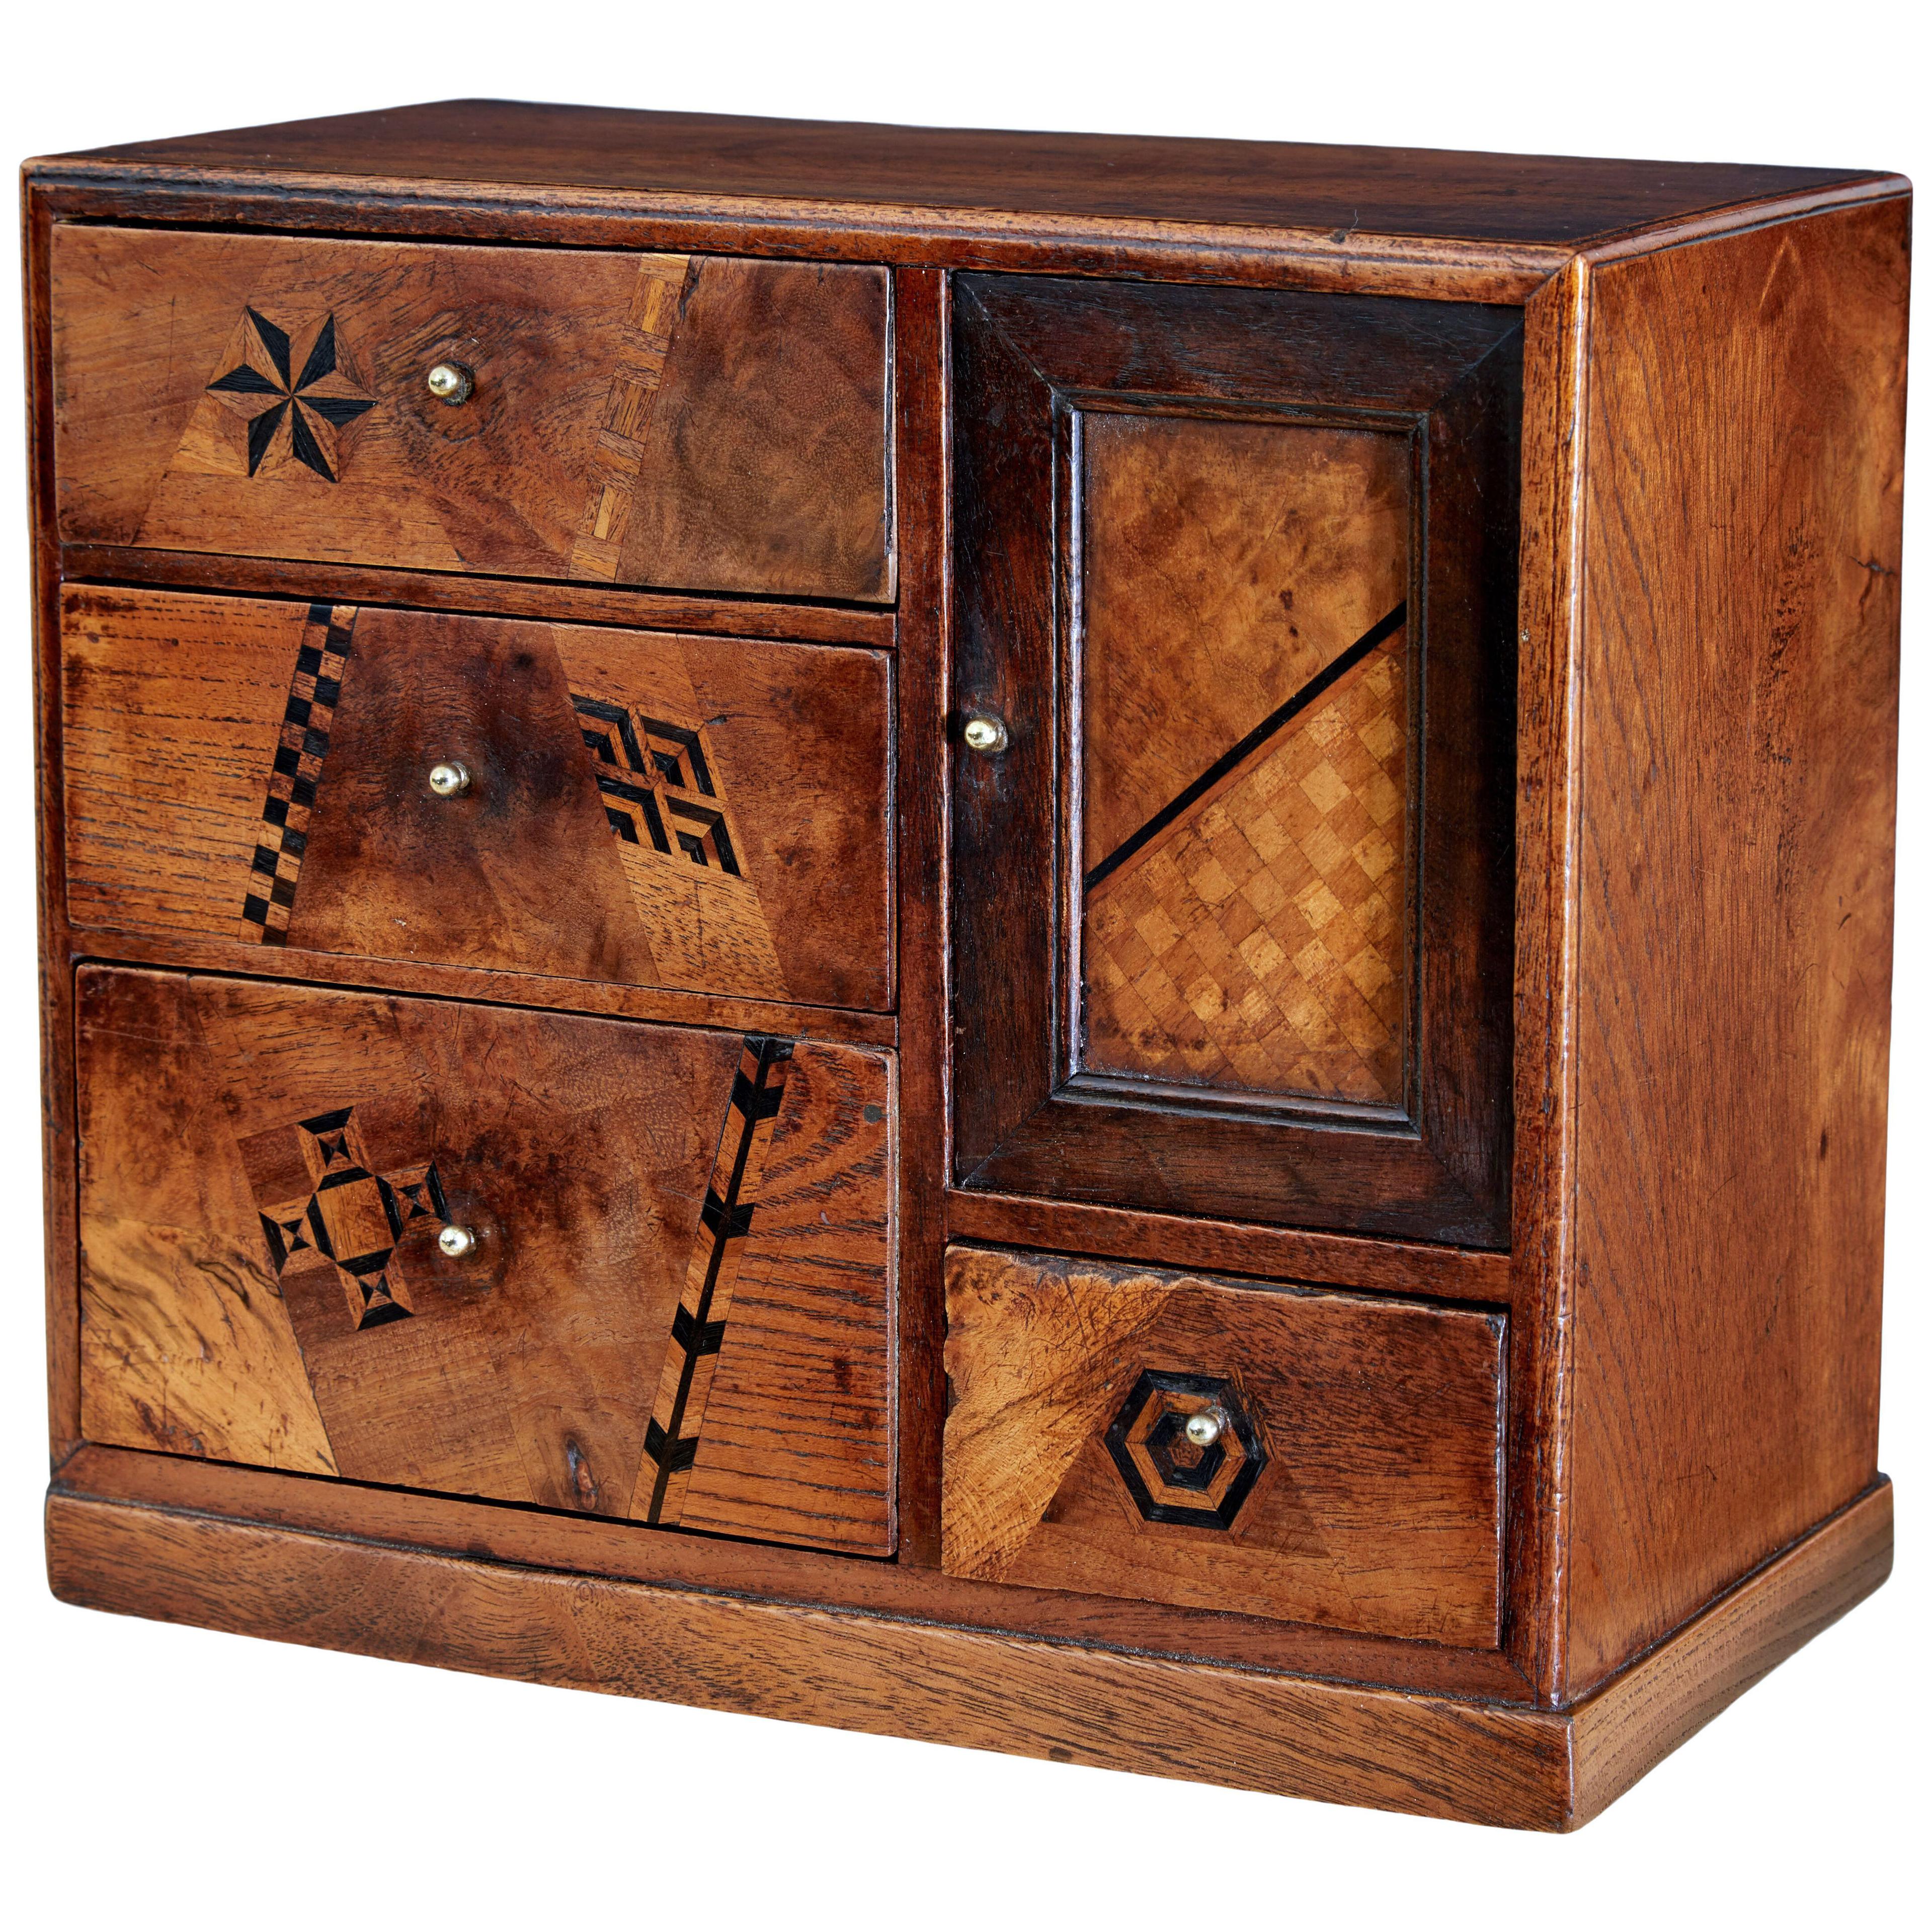 EARLY 20TH INLAID DESKTOP DRAWER CABINET